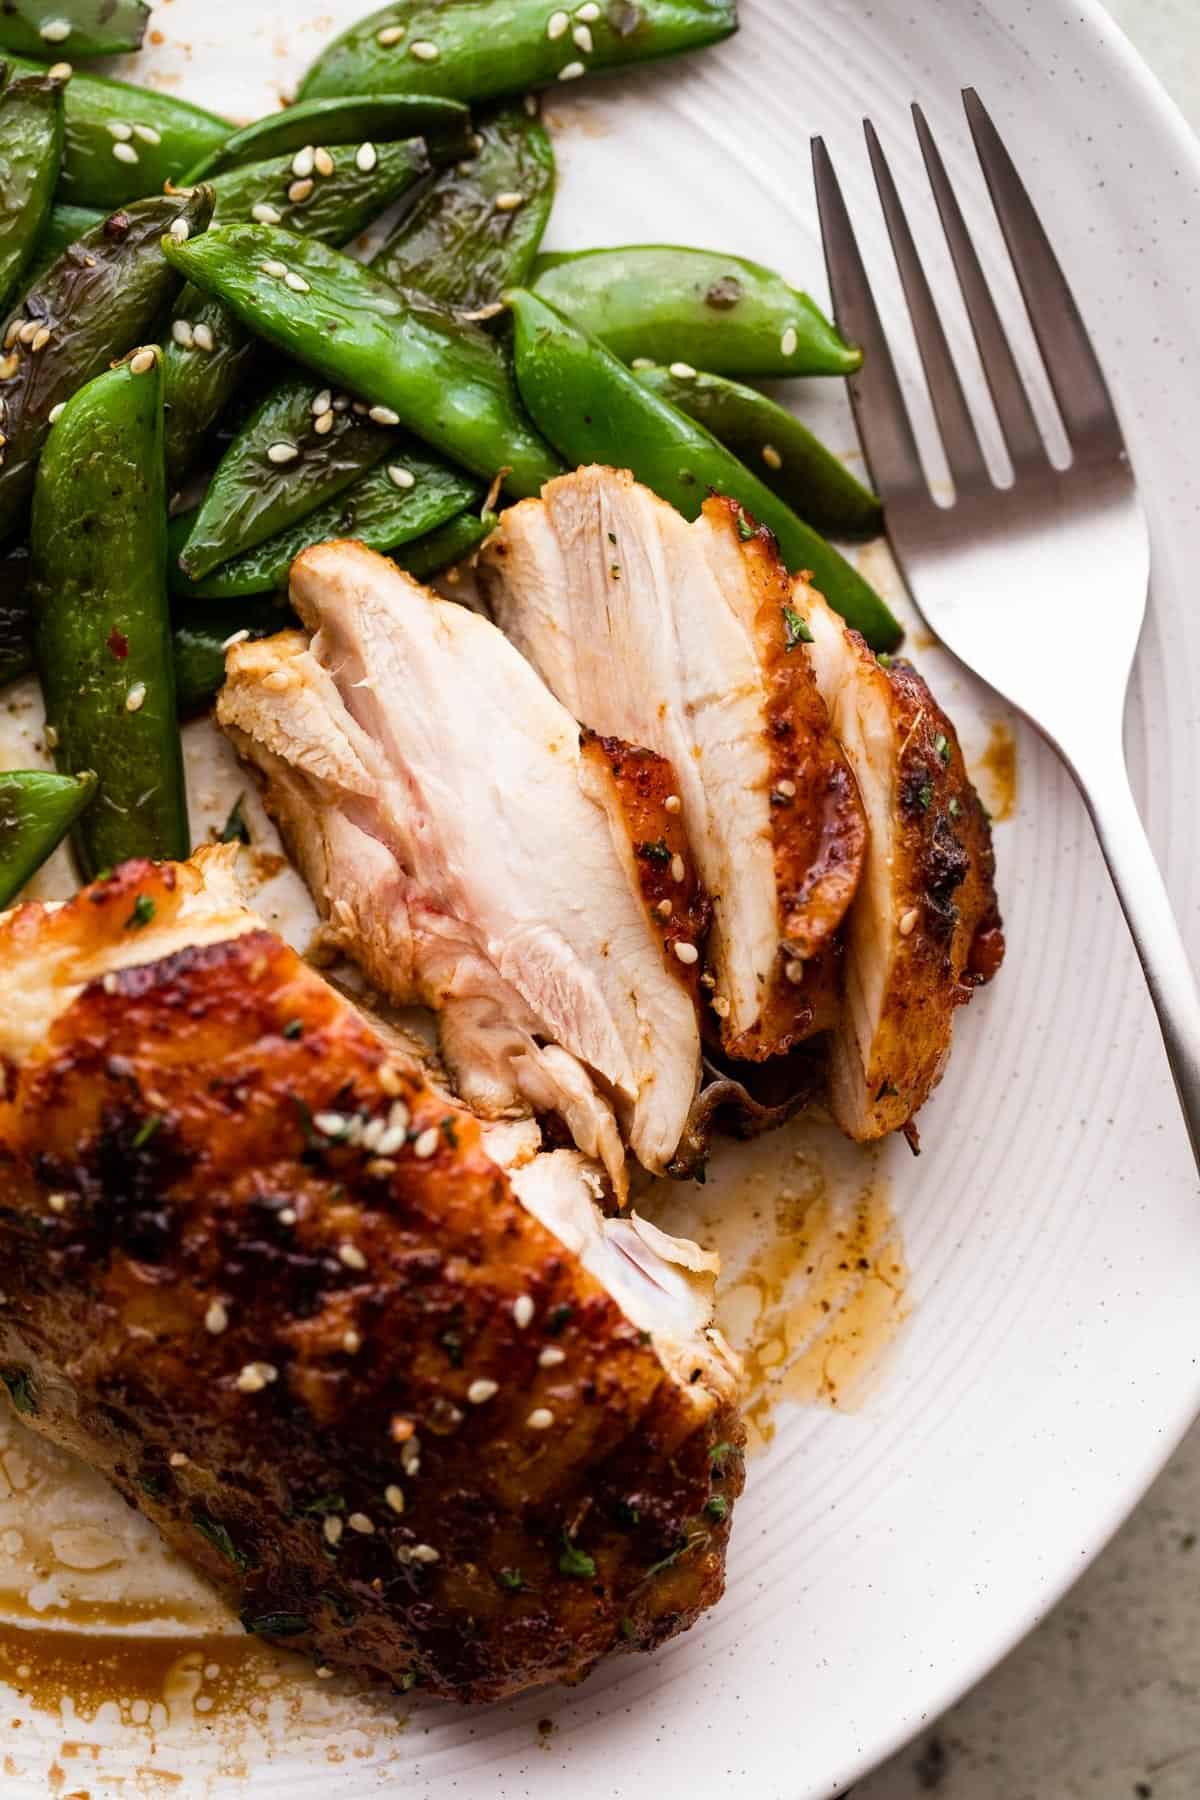 cooked and sliced chicken thigh on a white dinner plate, served alongside sugar snap peas, and a fork placed next to the chicken.